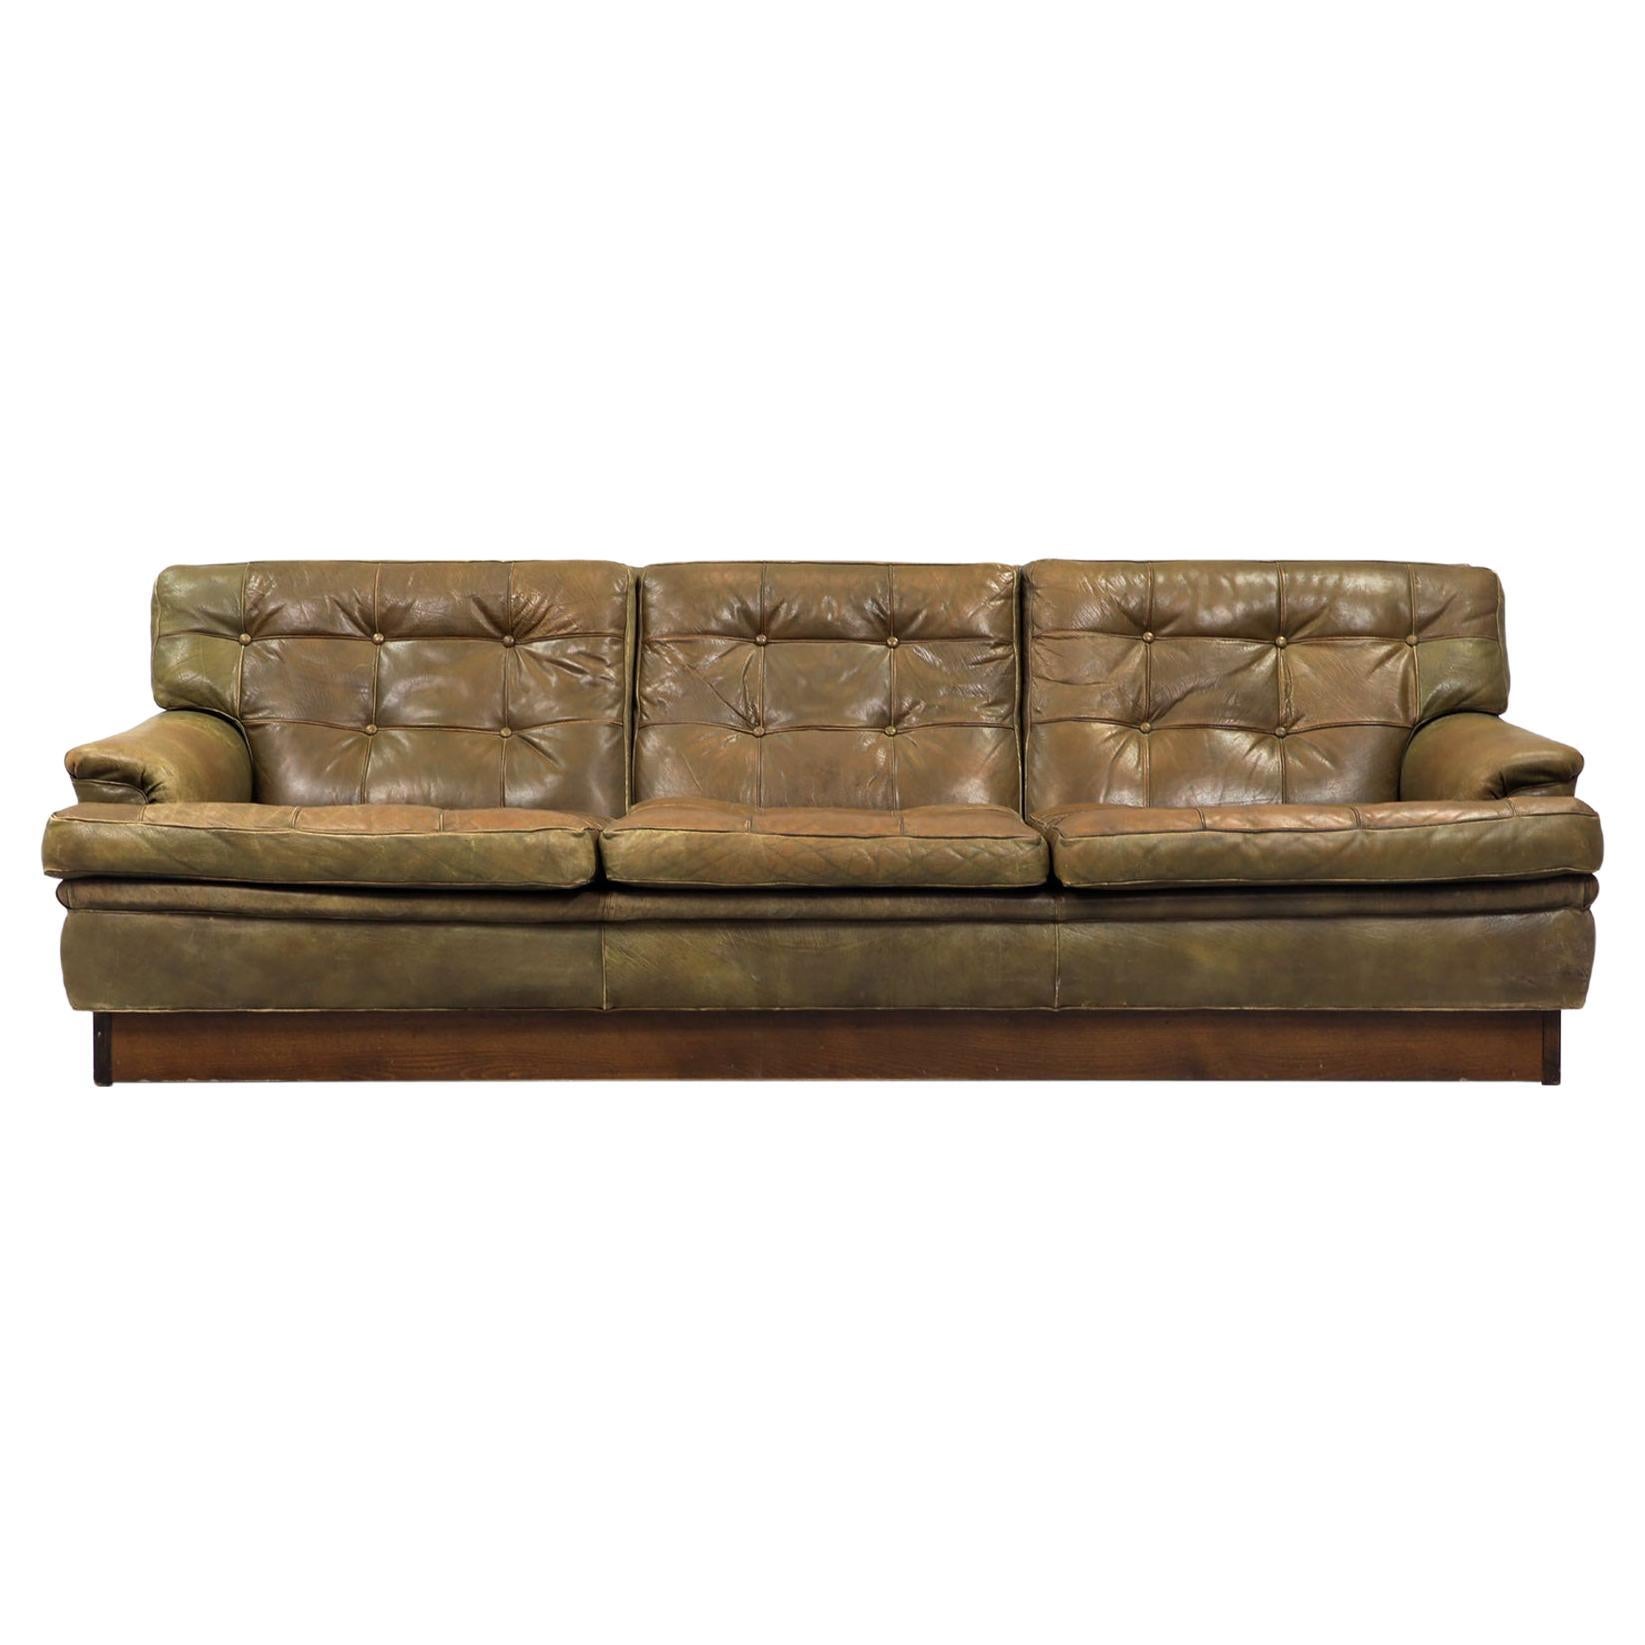 Arne Norell 'Mexico' Sofa in Moss Green Leather, 3 Seats, Denmark 1960s For Sale